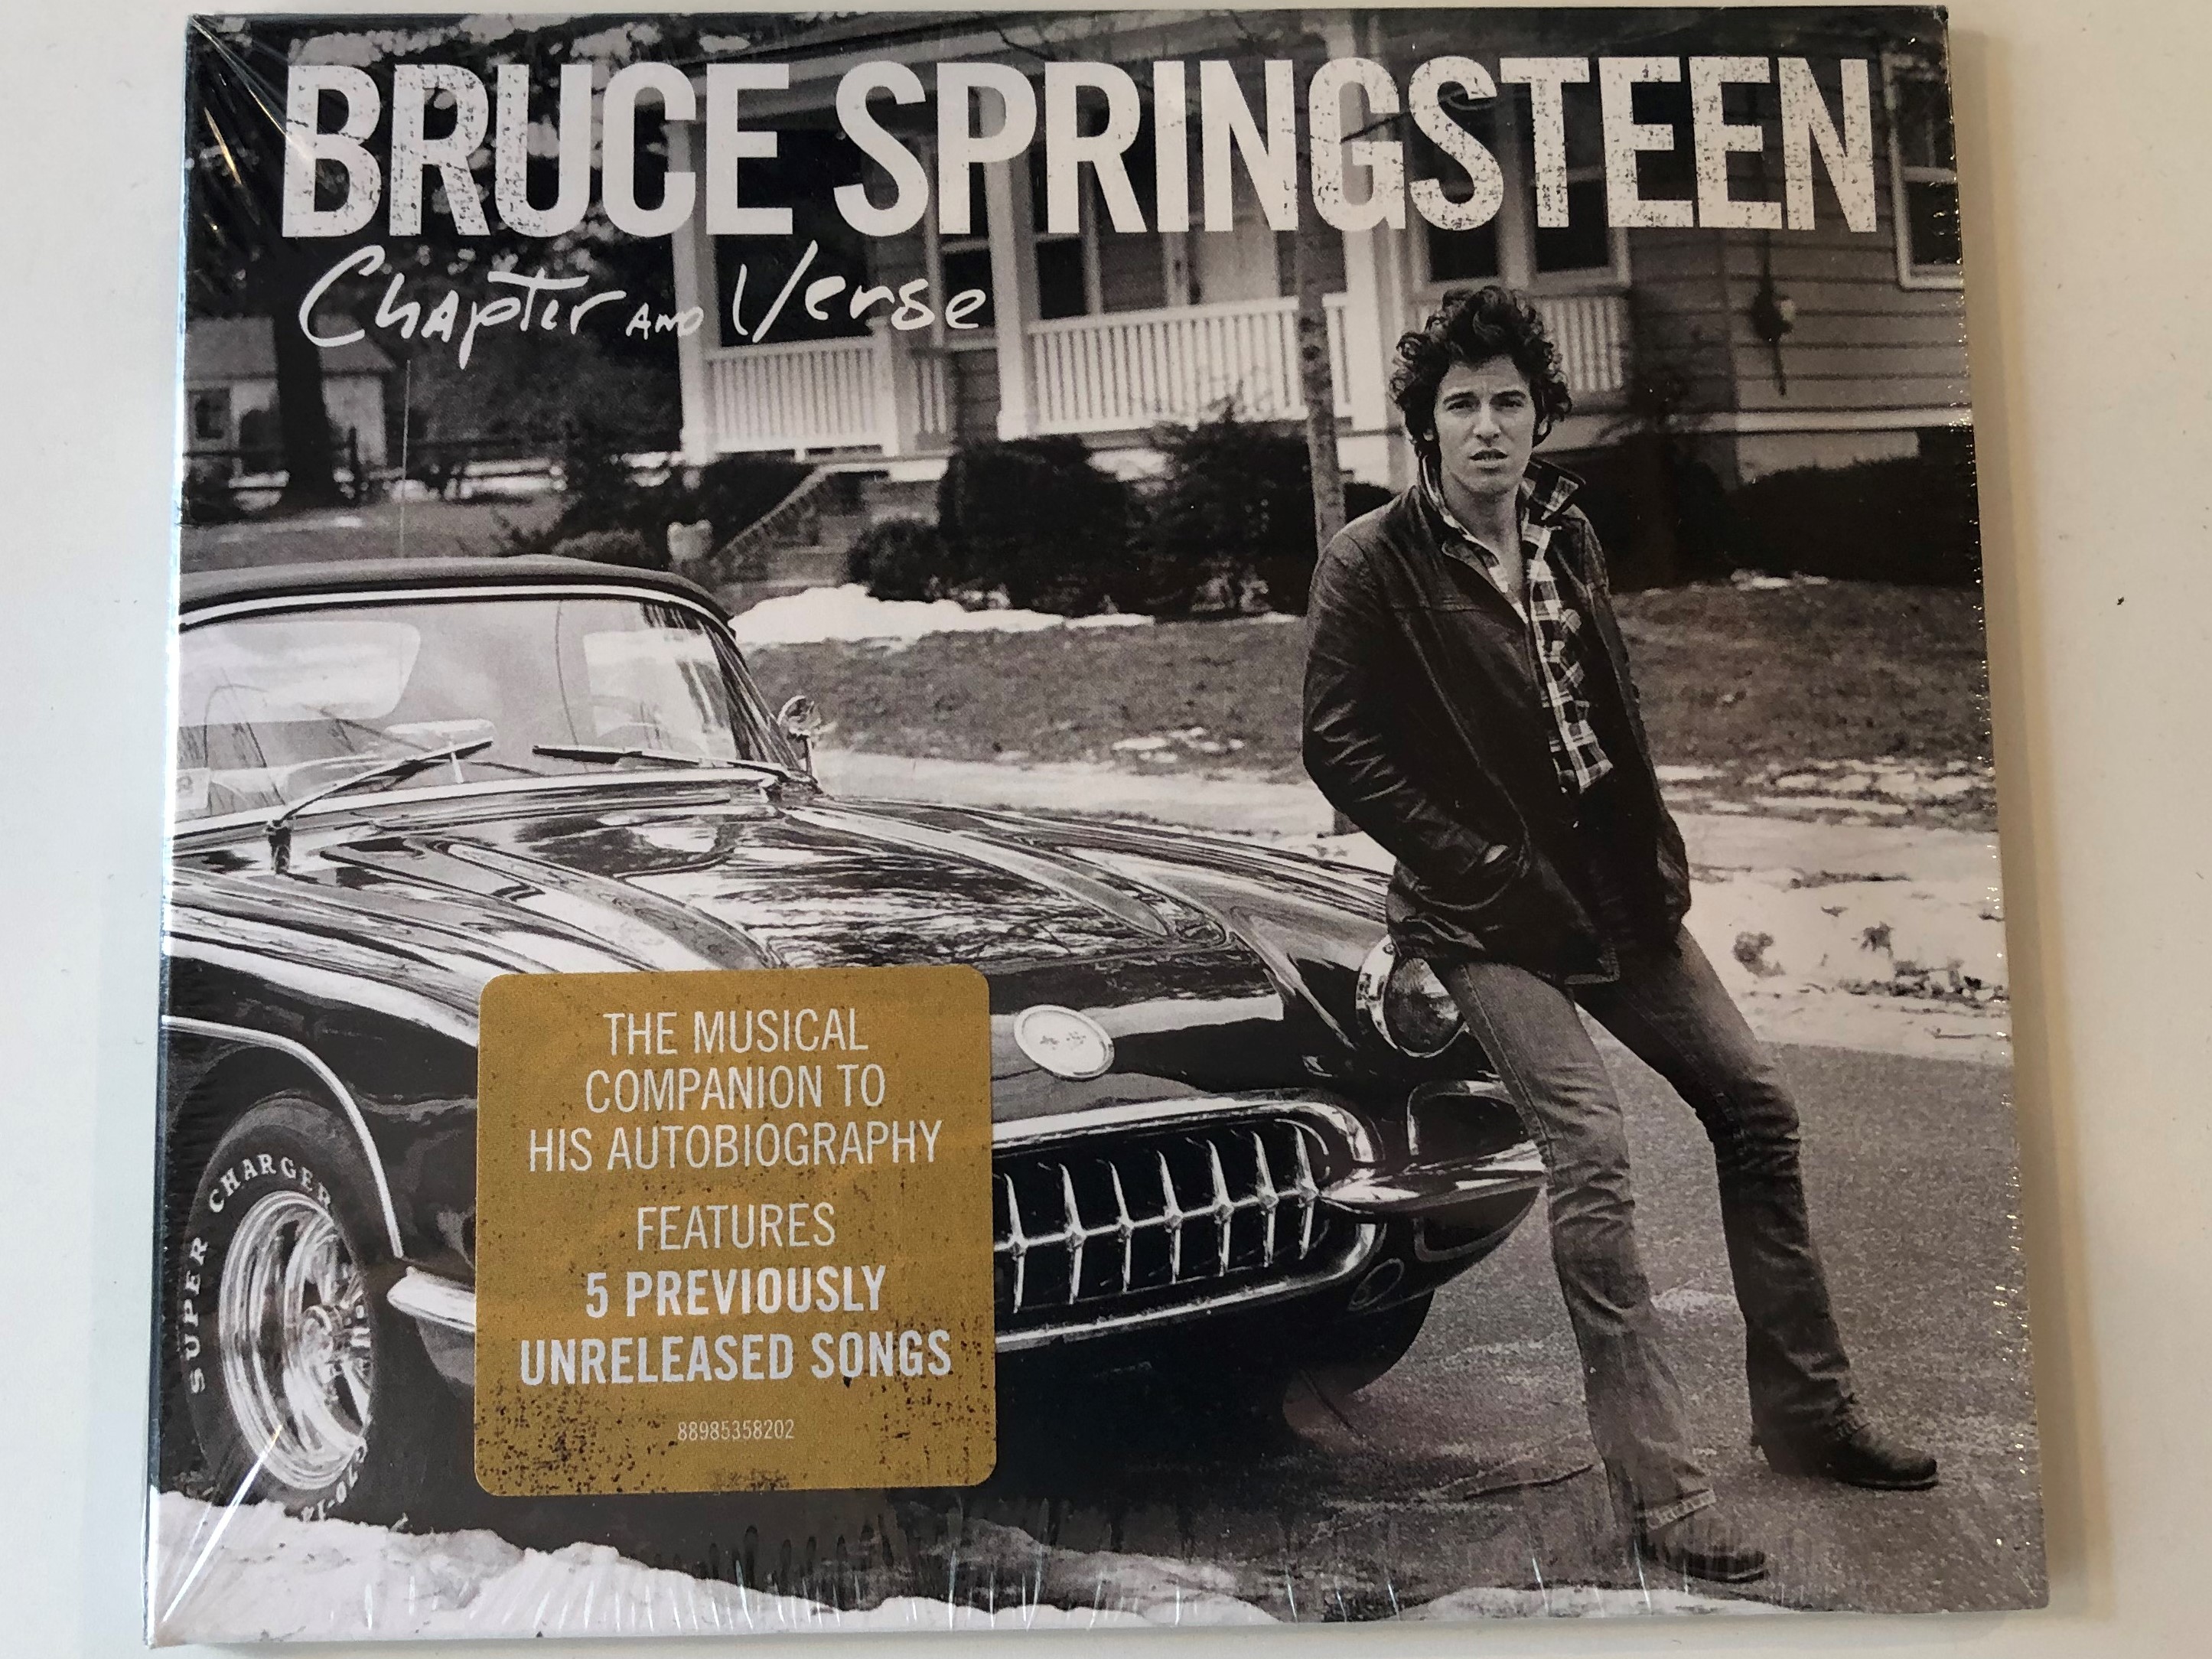 bruce-springsteen-chapter-and-verse-the-musical-companion-to-his-autobiography-features-5-previously-unrealeased-songs-columbia-audio-cd-2016-88985358202-1-.jpg